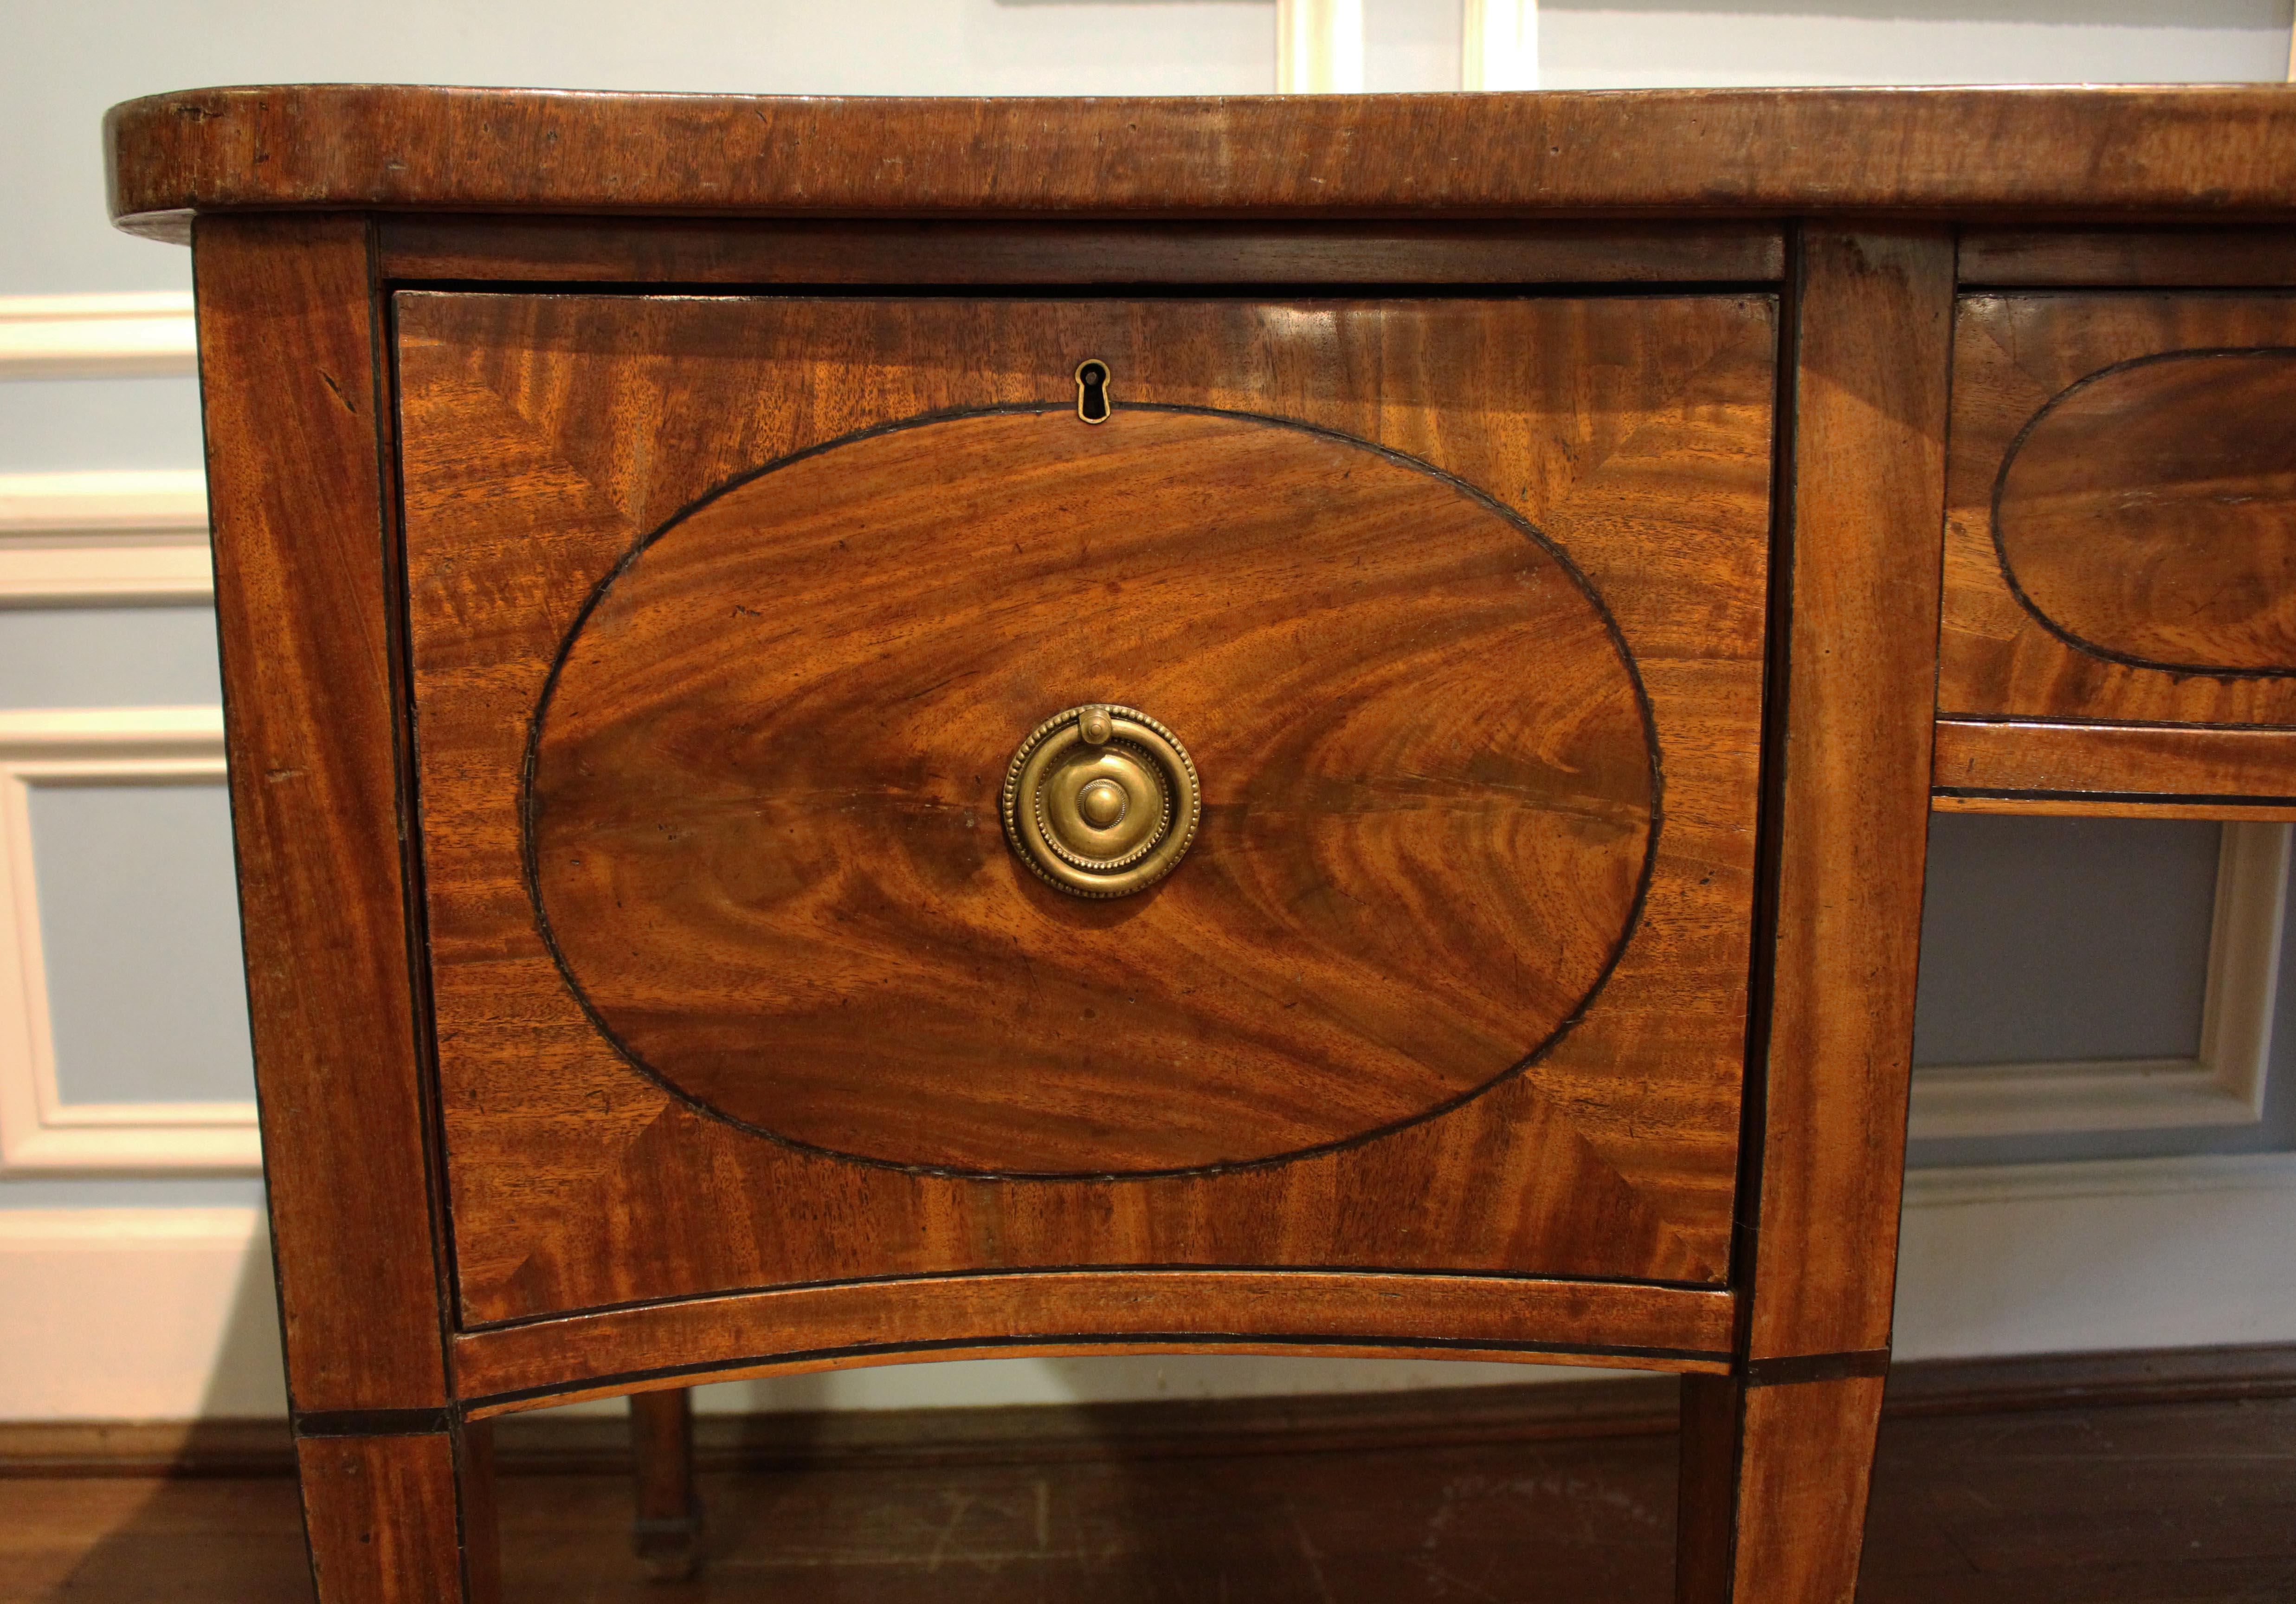 Late 18th to Early 19th Century English Serpentine Form Sideboard In Good Condition For Sale In Chapel Hill, NC